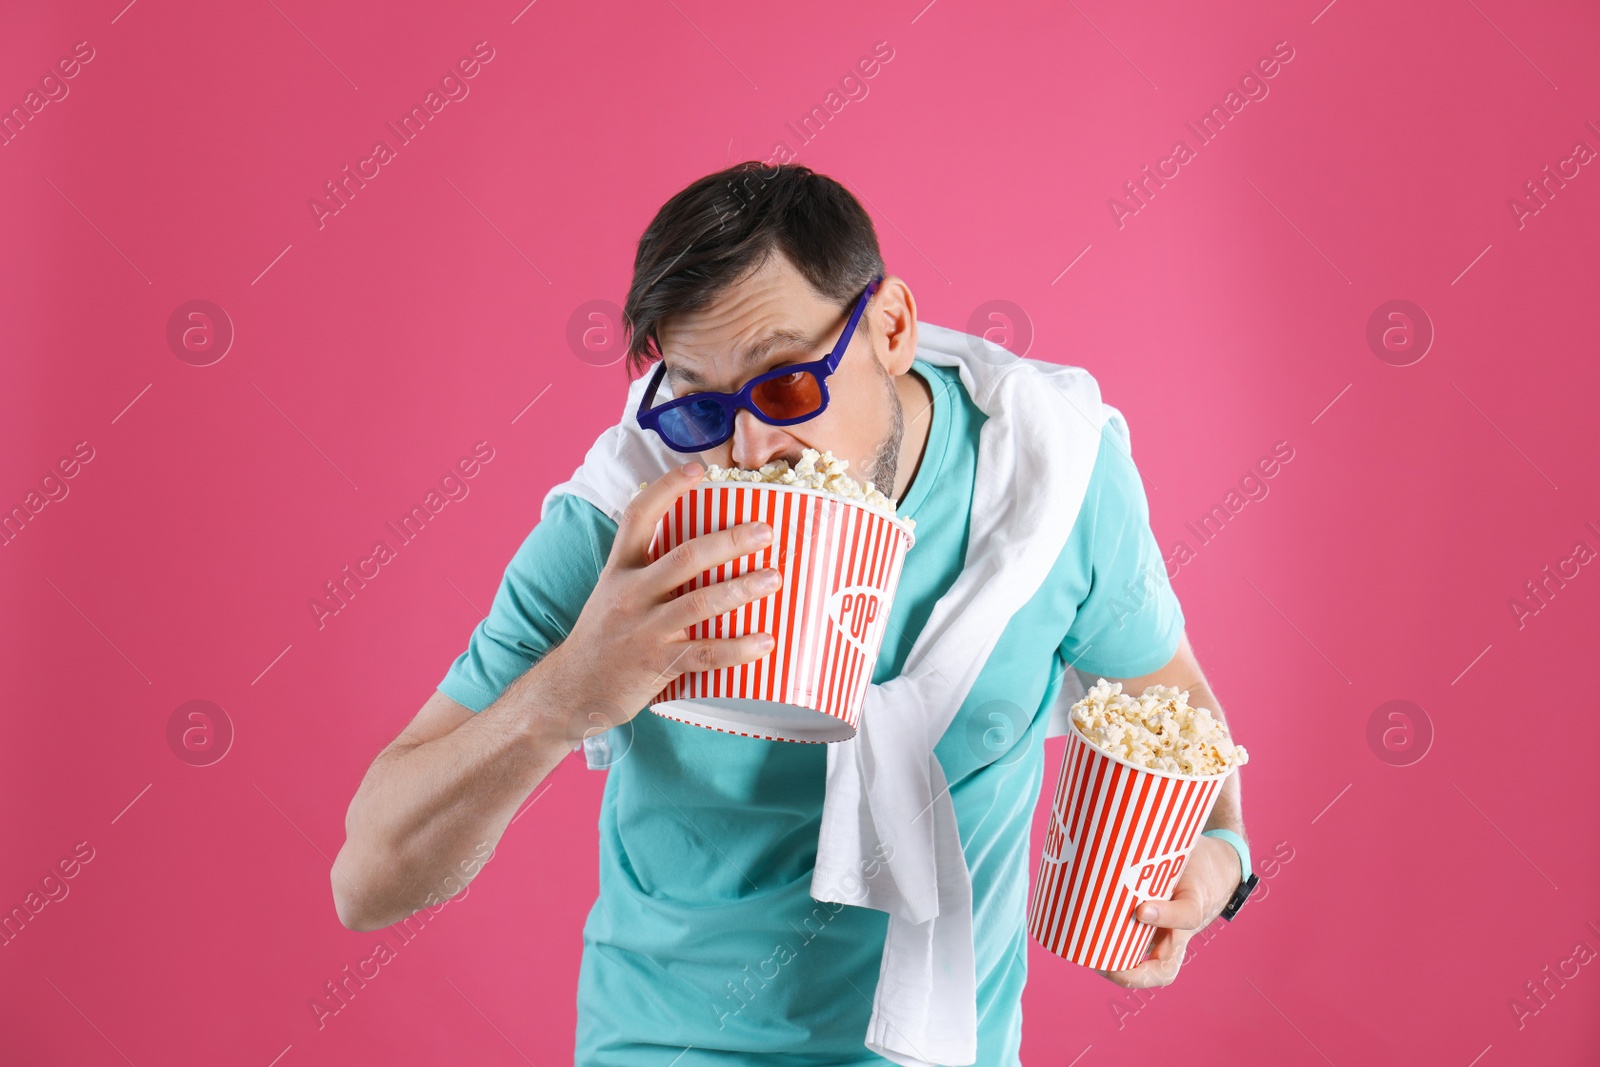 Photo of Man with 3D glasses eating tasty popcorn on color background